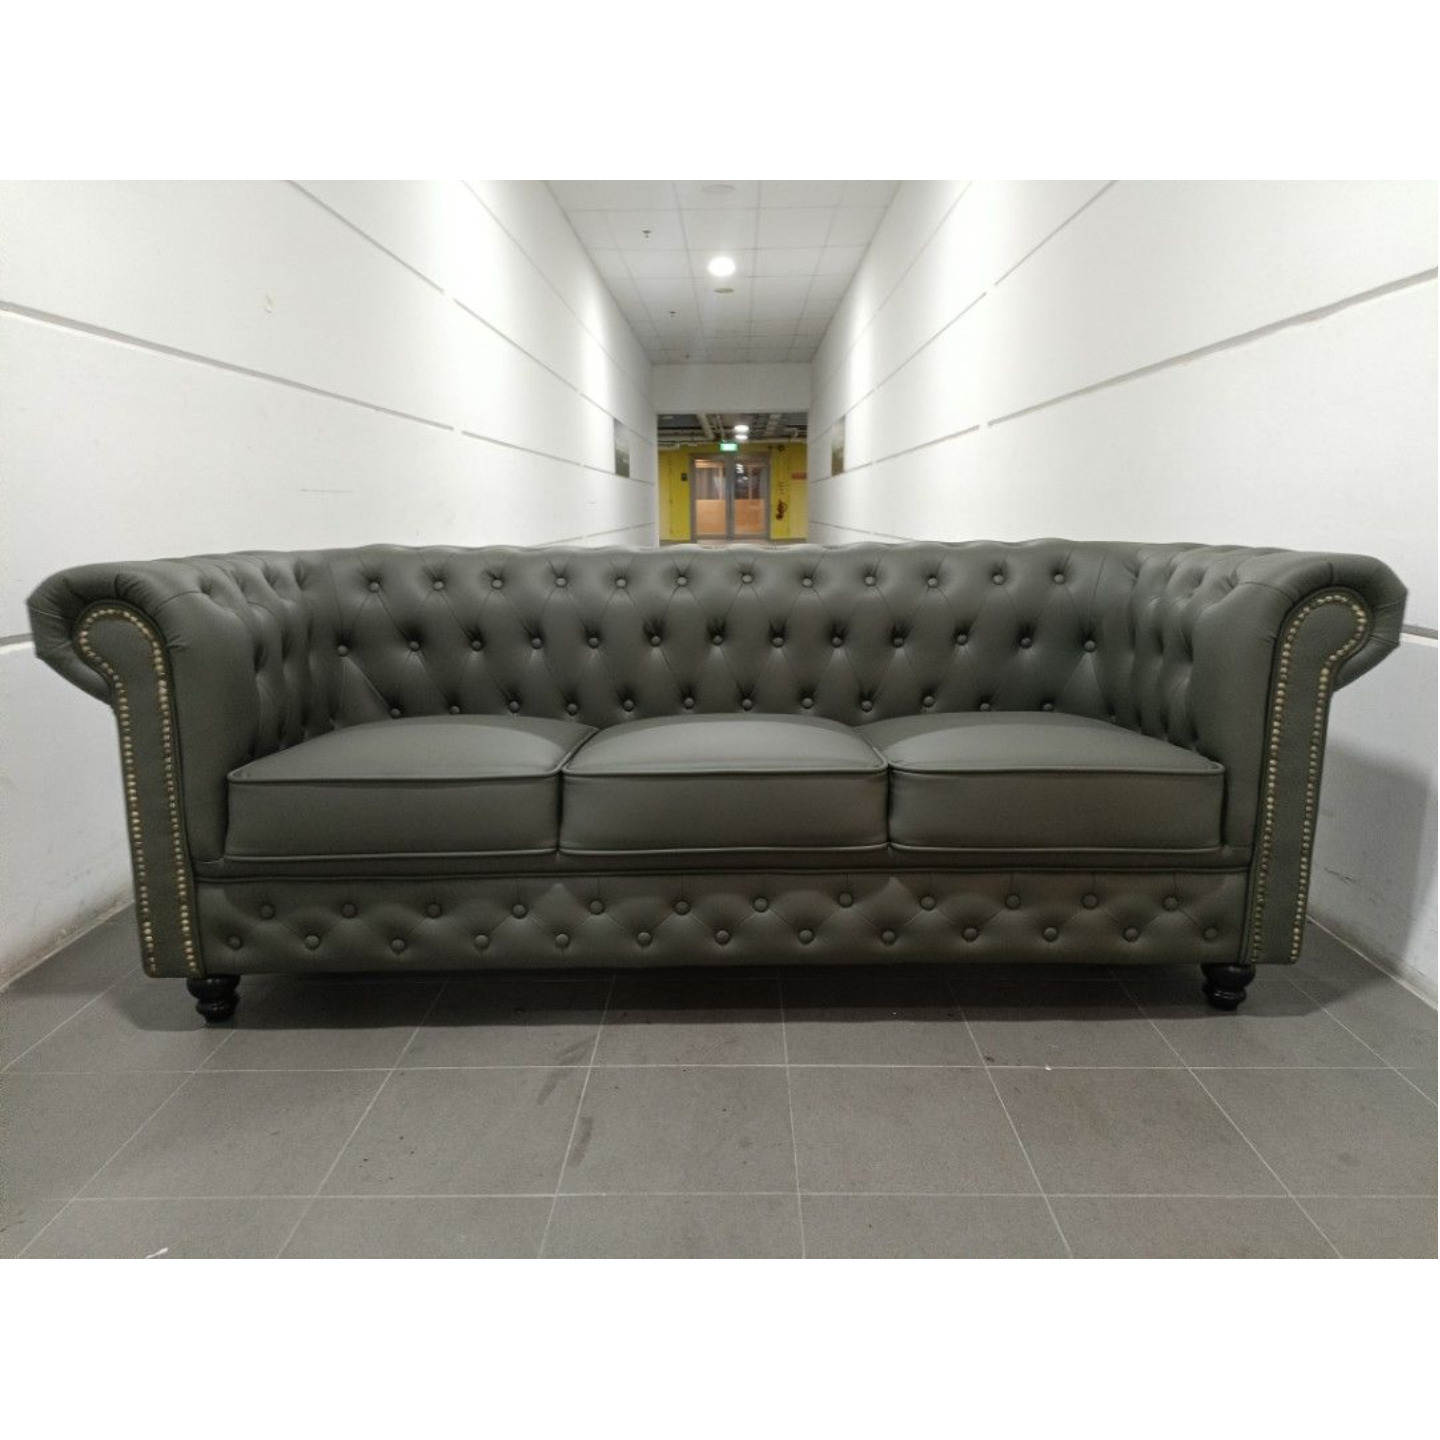 PRE ORDER CAT FRIENDLY SALVADORE X 3 Seater Chesterfield Sofa in MATT OLIVE GREEN TECH PU LEATHER - Estimated Delivery by End of May 2023